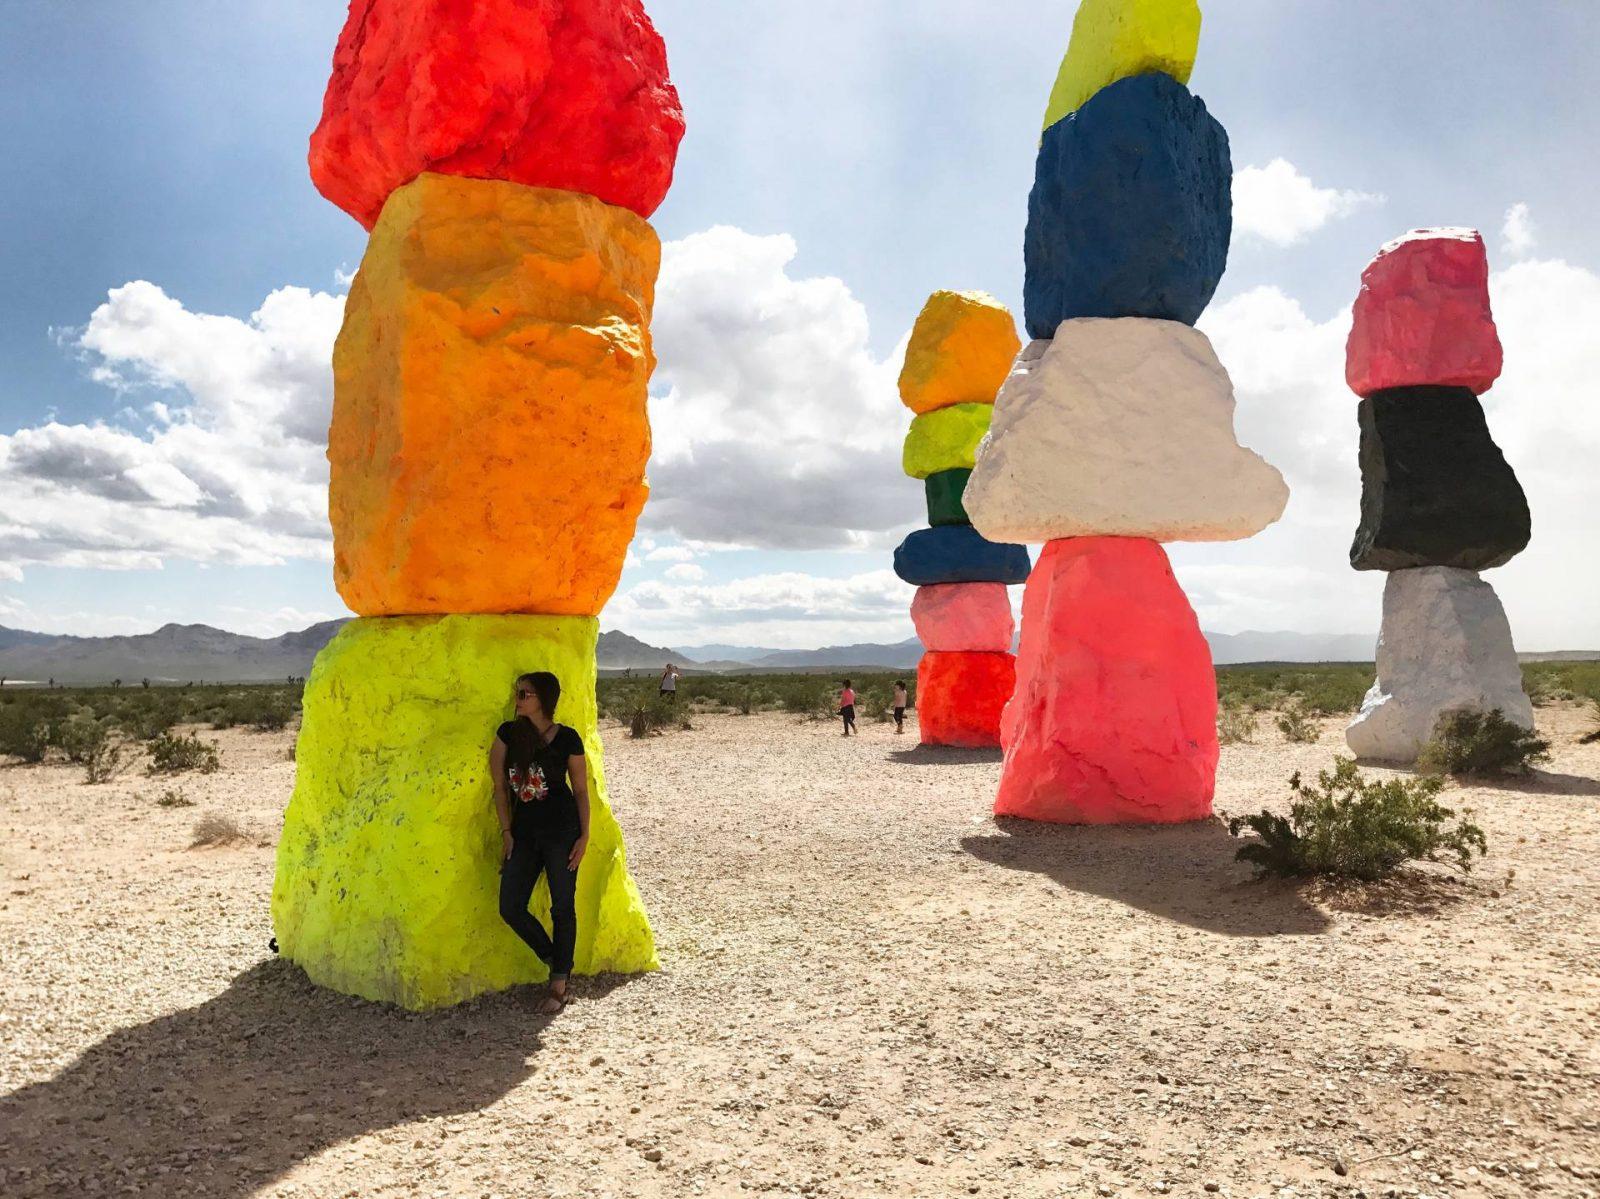 Experiencing Magic in the Desert at Seven Magic Mountains in Las Vegas